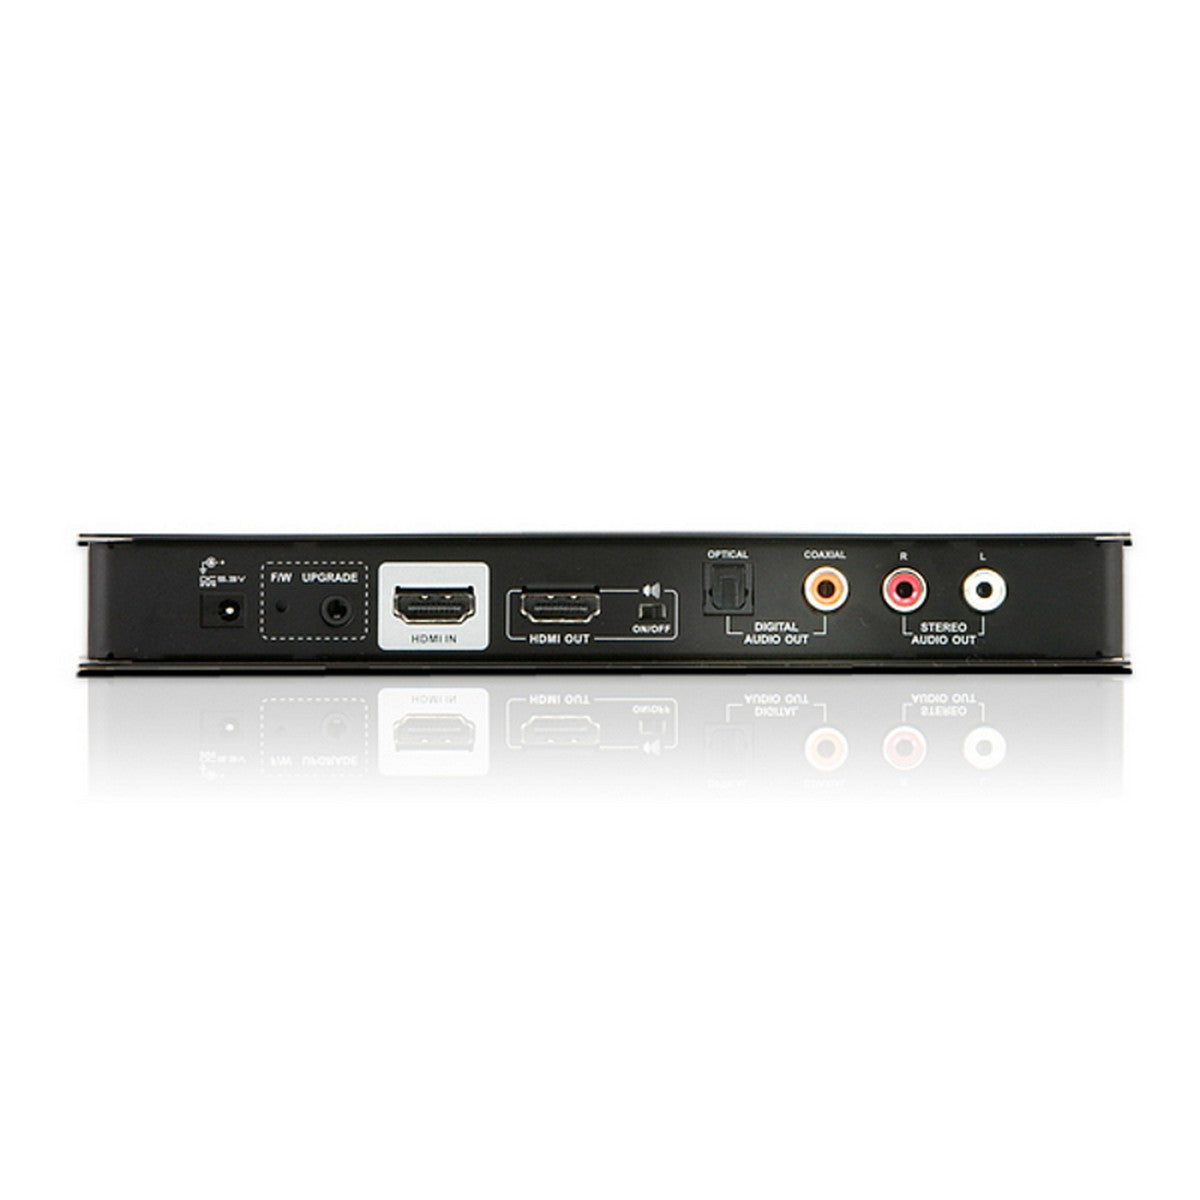 ATEN VC880 | HD Video Repeater Plus and Audio De-embedder